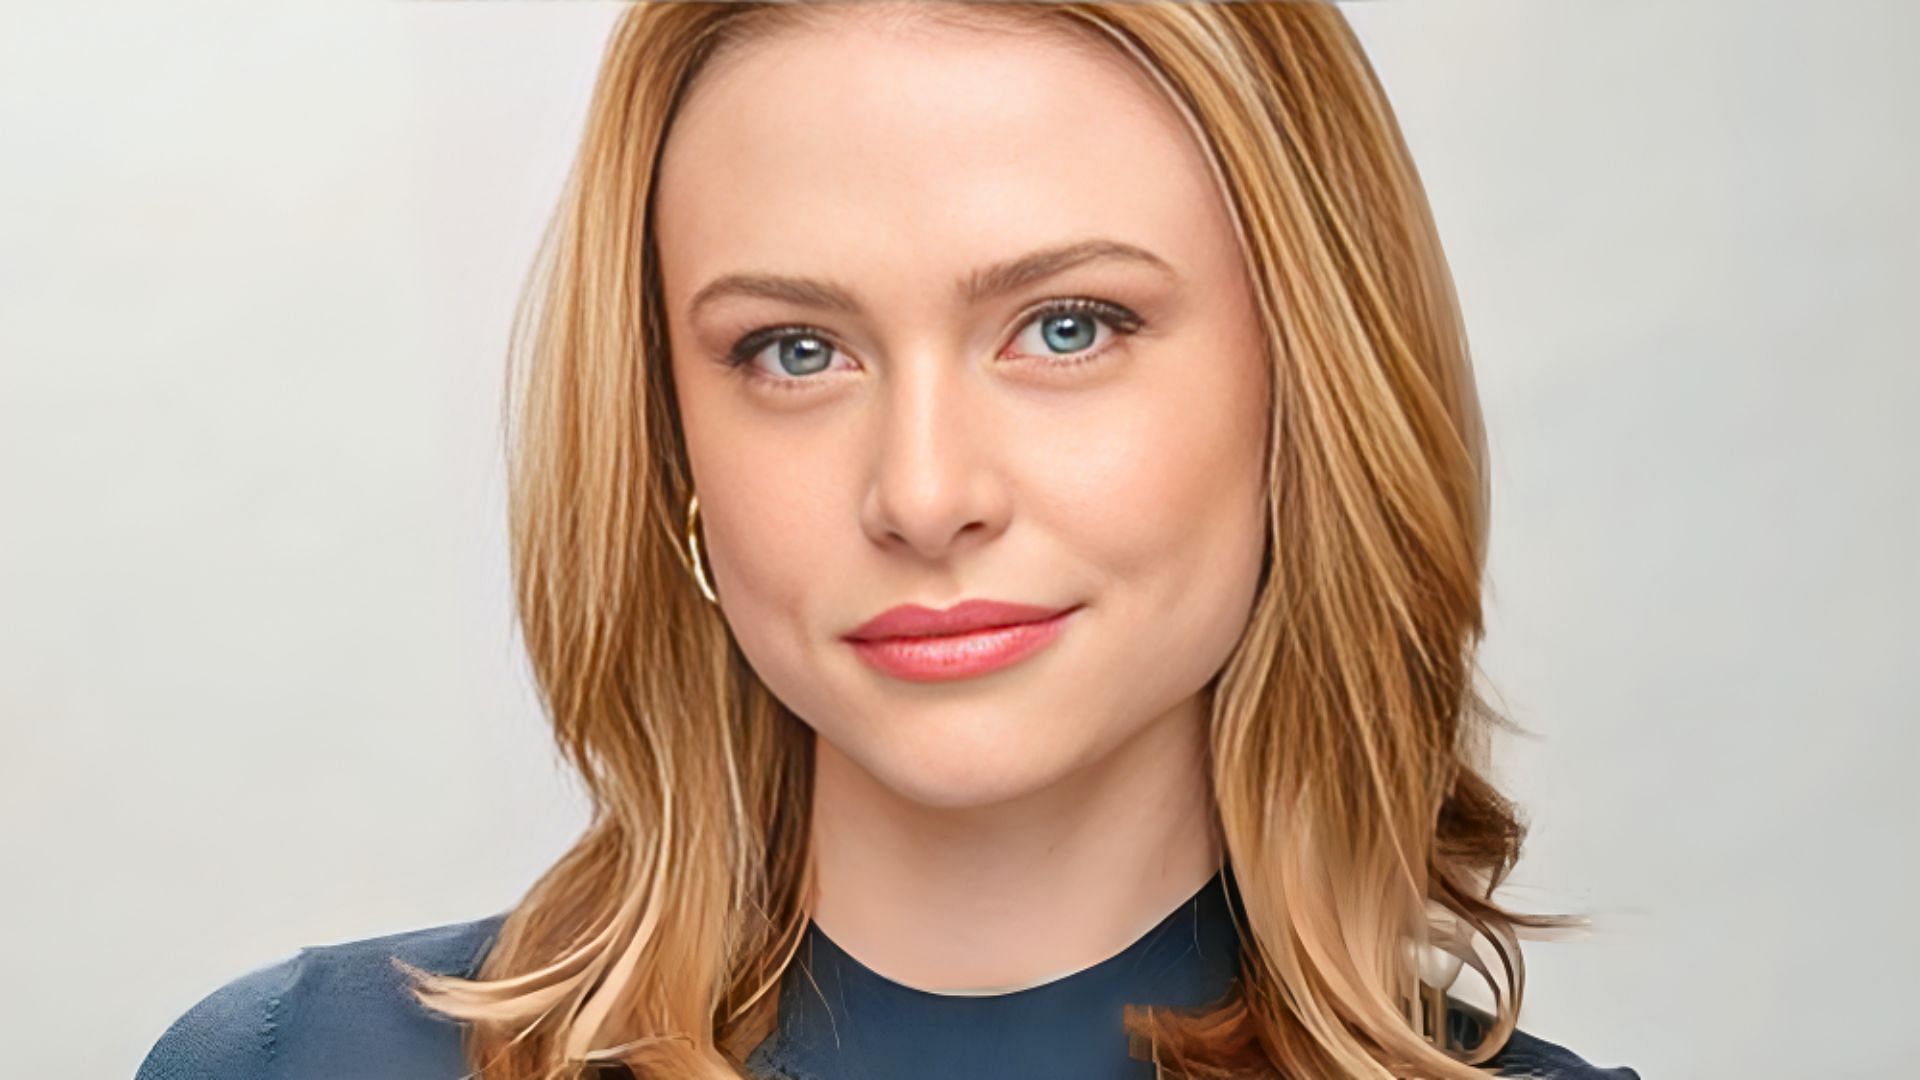 Hayley Erin plays Claire on The Young and the Restless (Image via CBS)